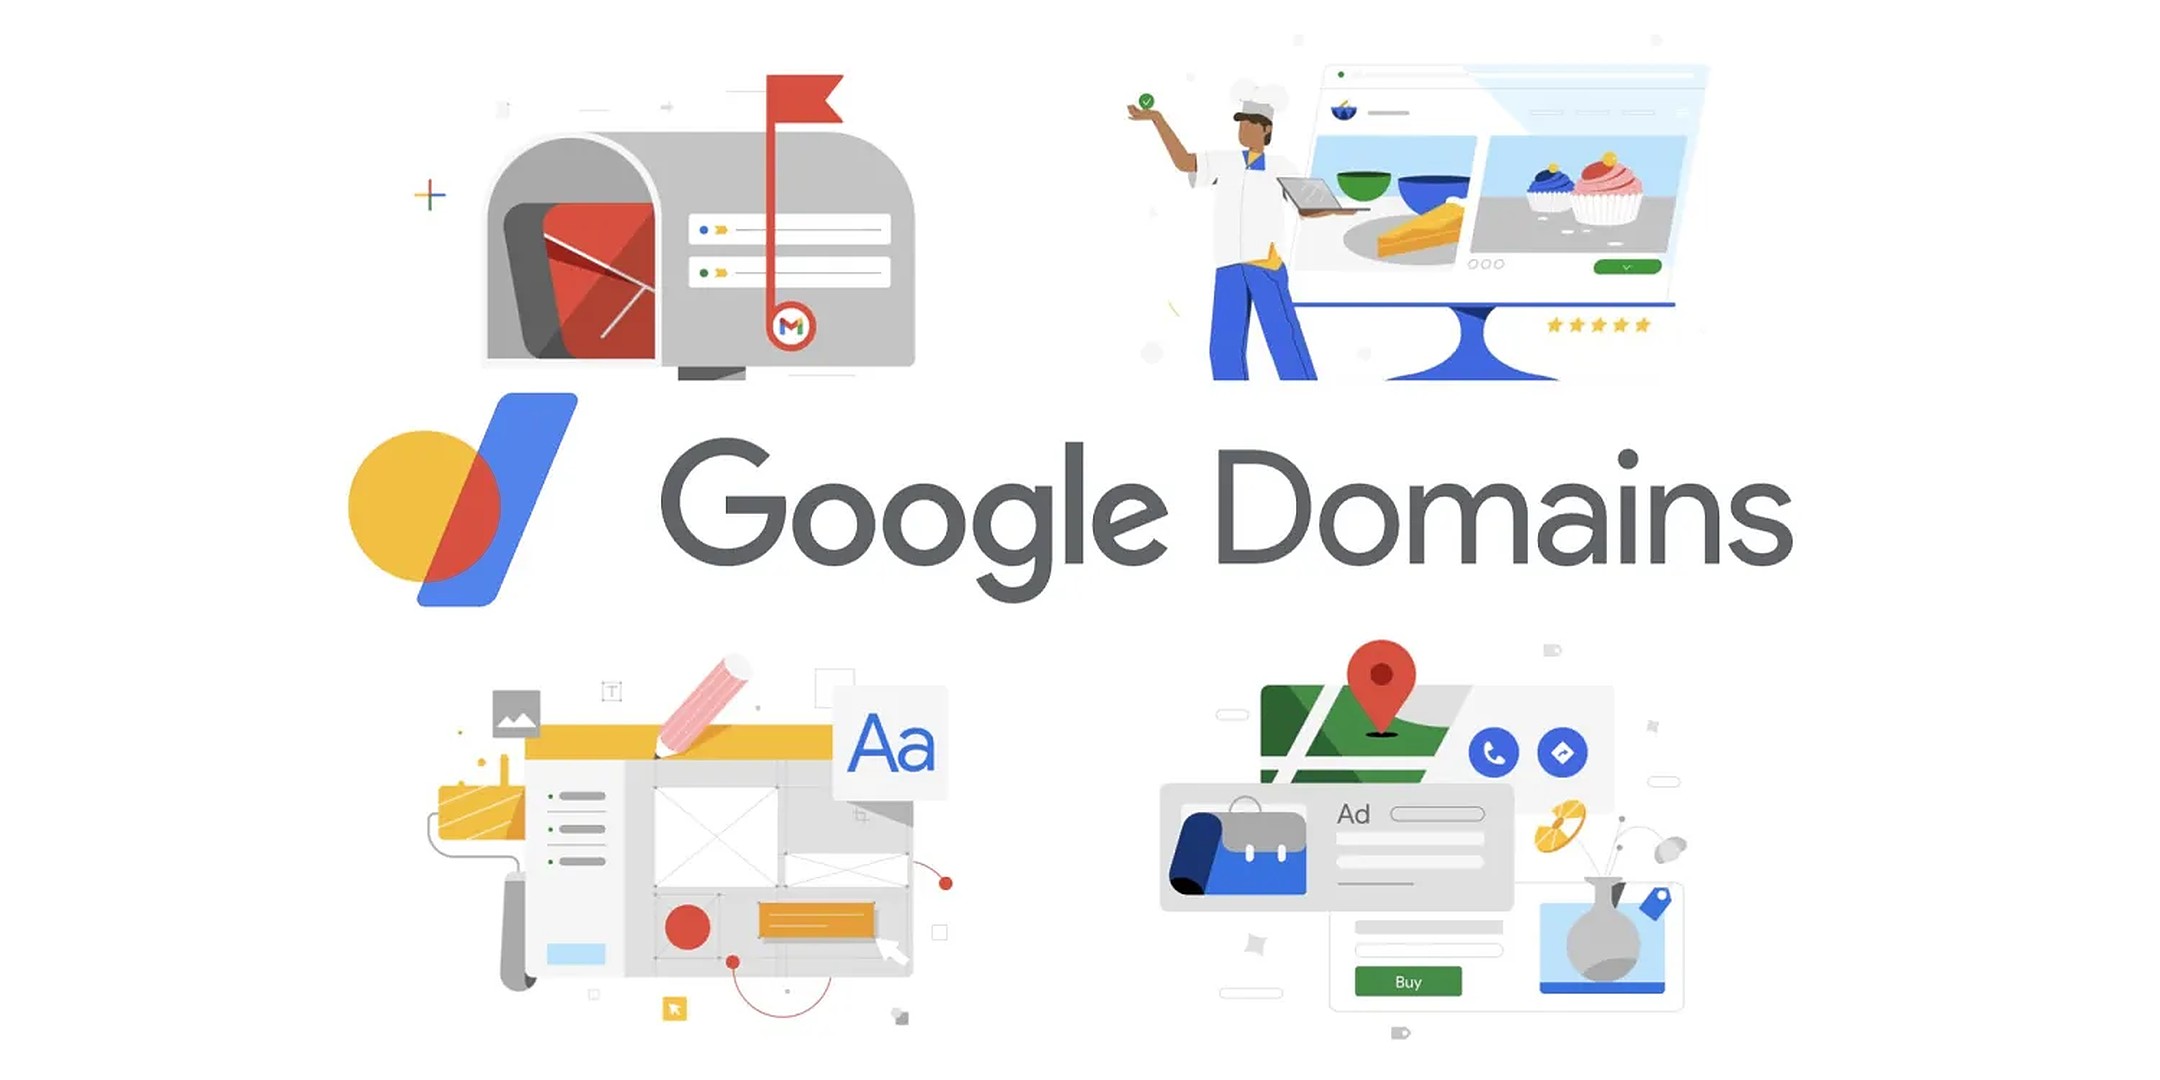 Google Domains Closes: Assets Sold to Squarespace